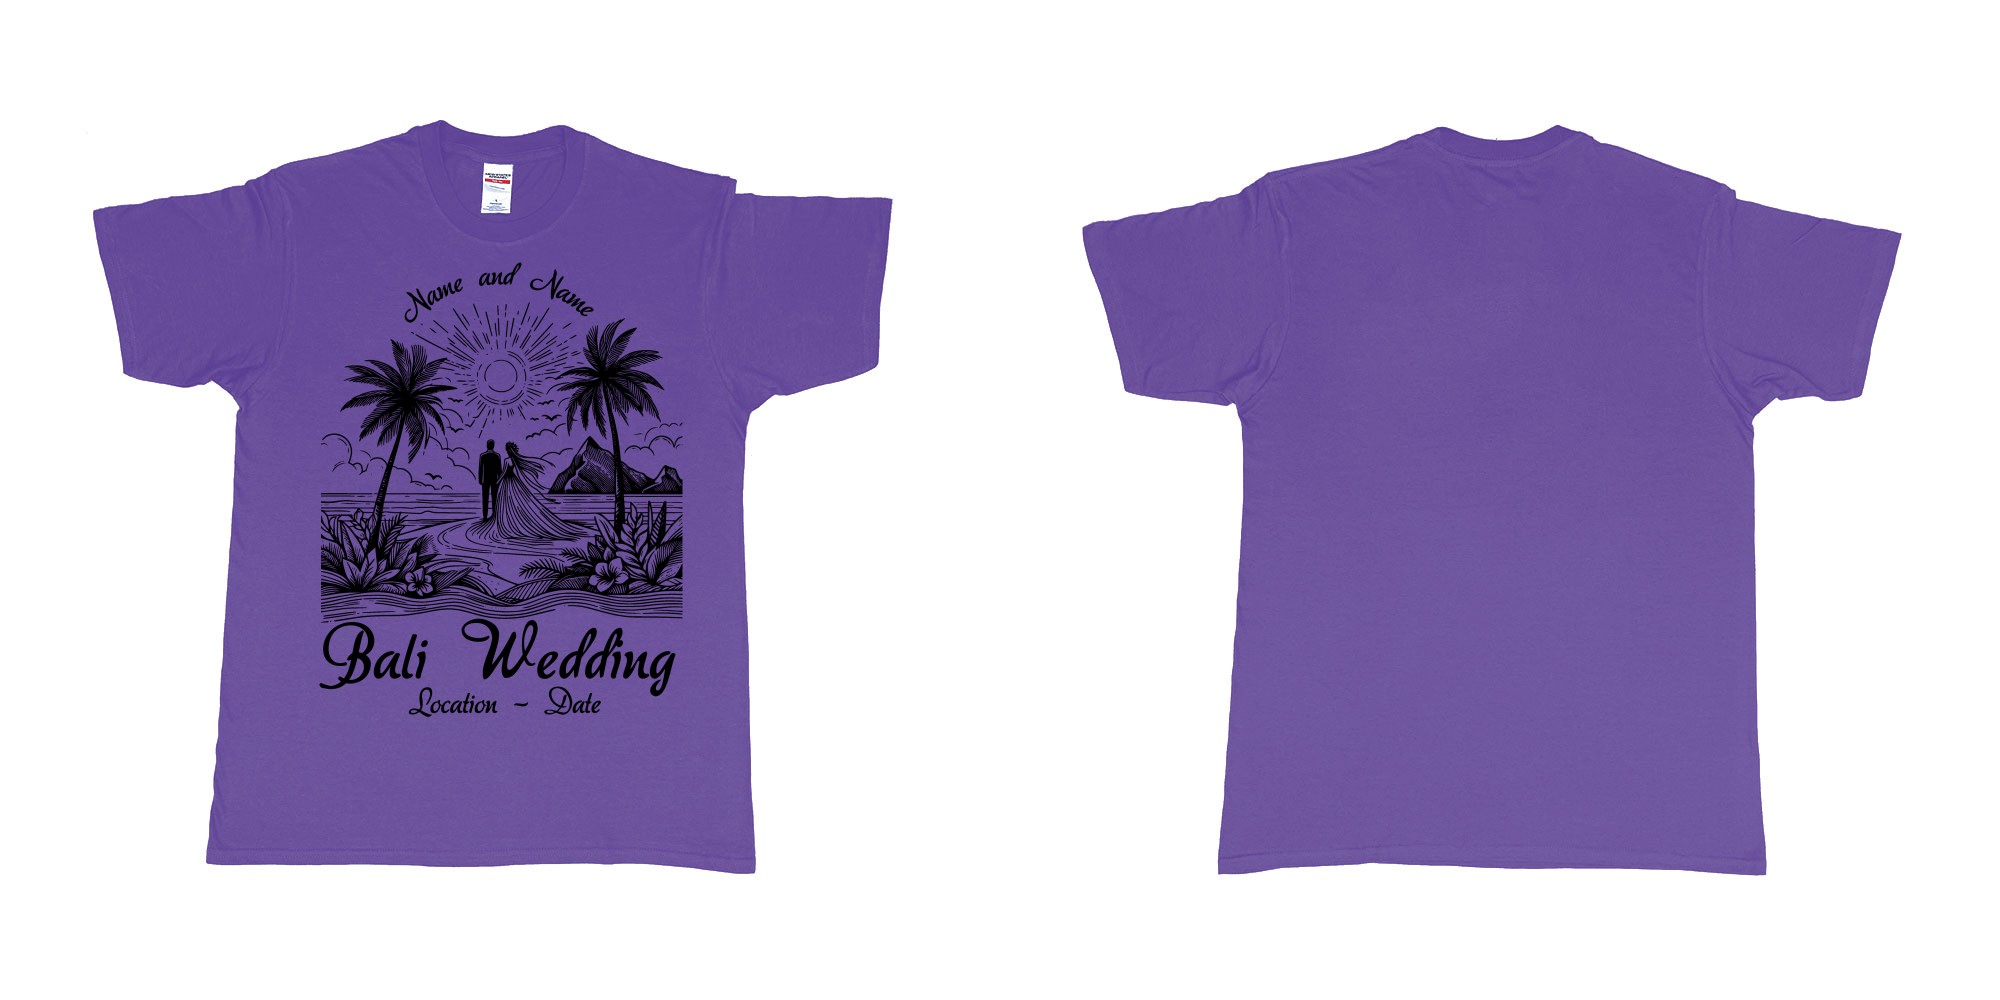 Custom tshirt design bali wedding drawing couple beach sunset palmtrees in fabric color purple choice your own text made in Bali by The Pirate Way